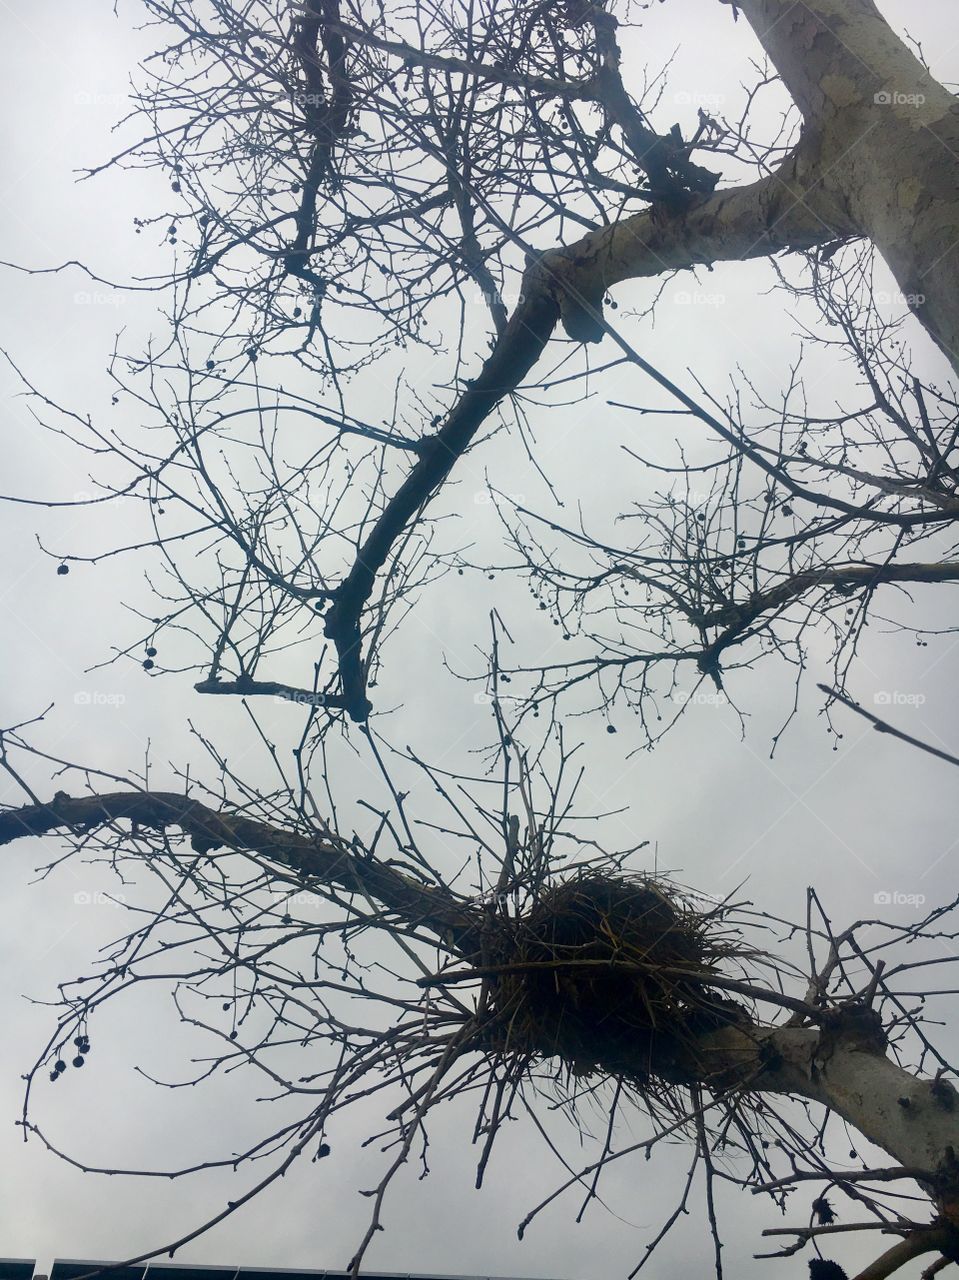 A nest among the branches of a tree